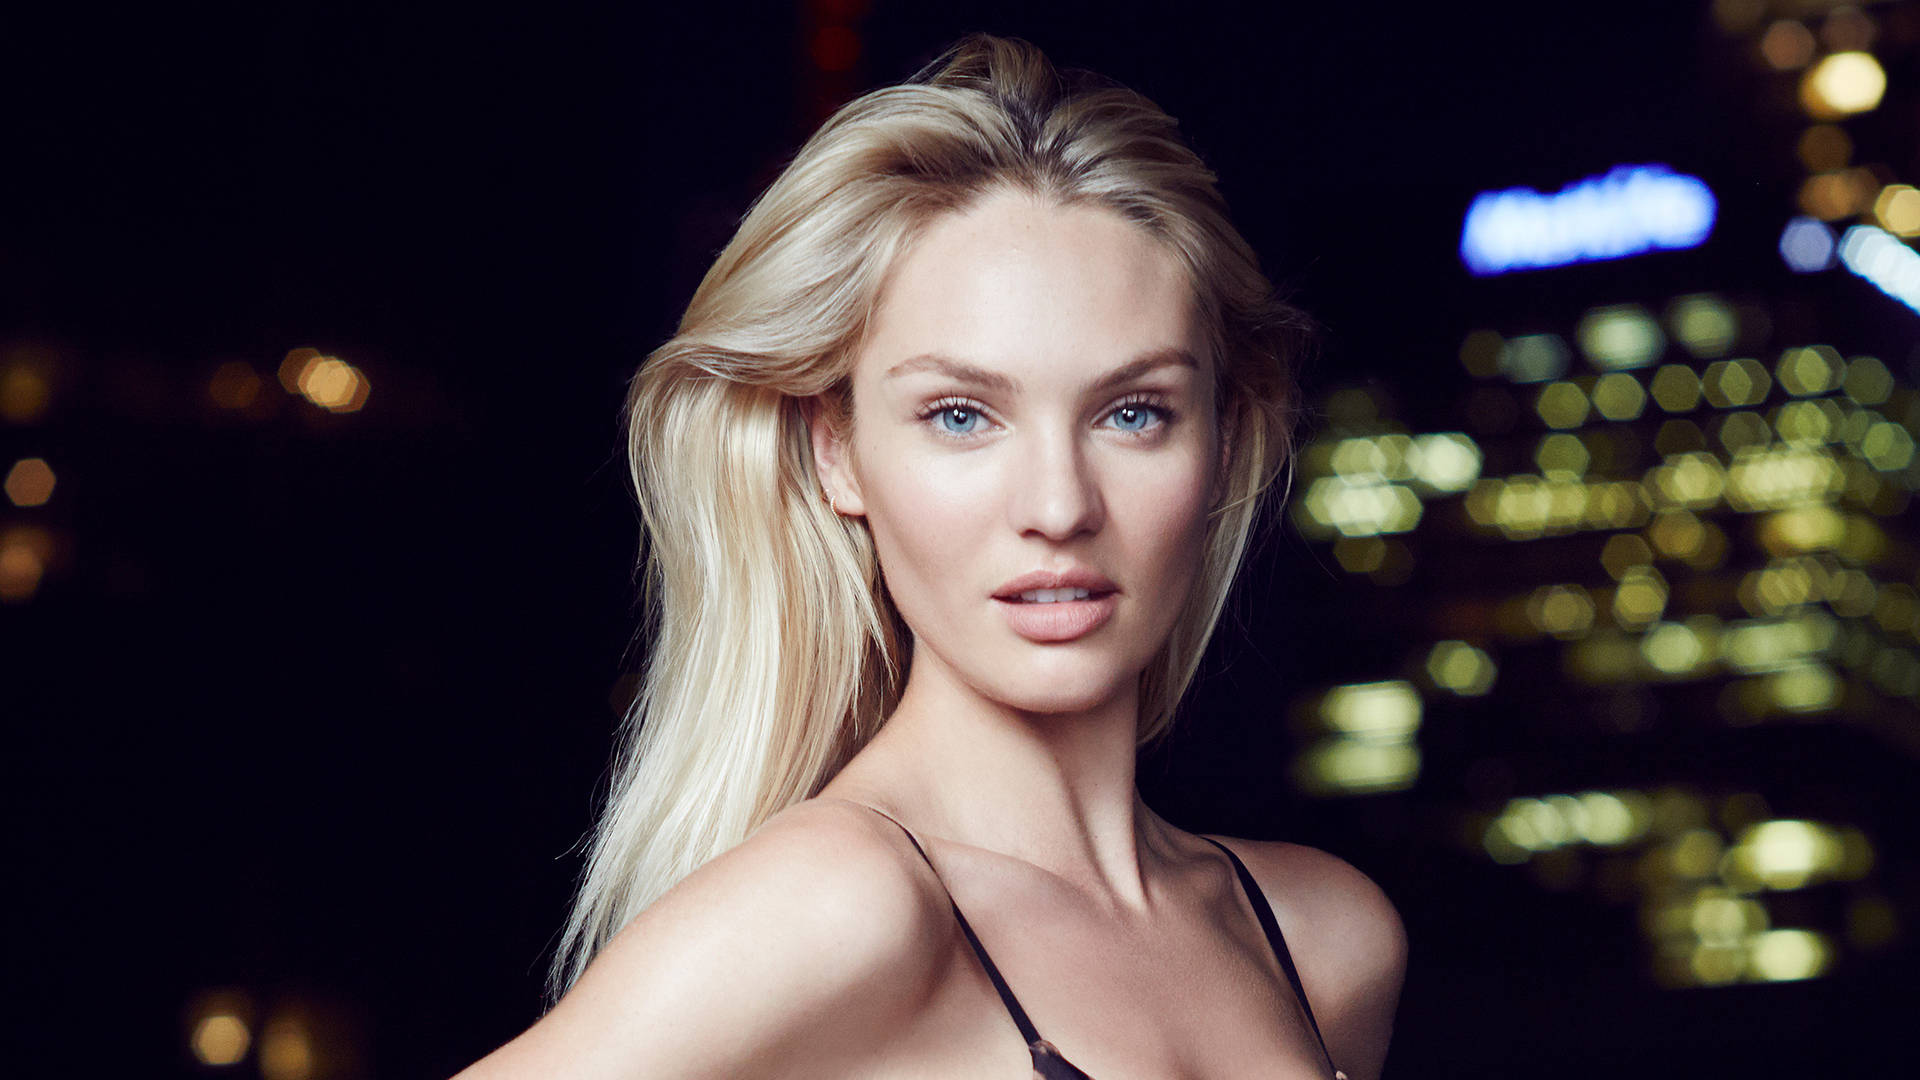 Candice Swanepoel City Lights Photography Wallpaper